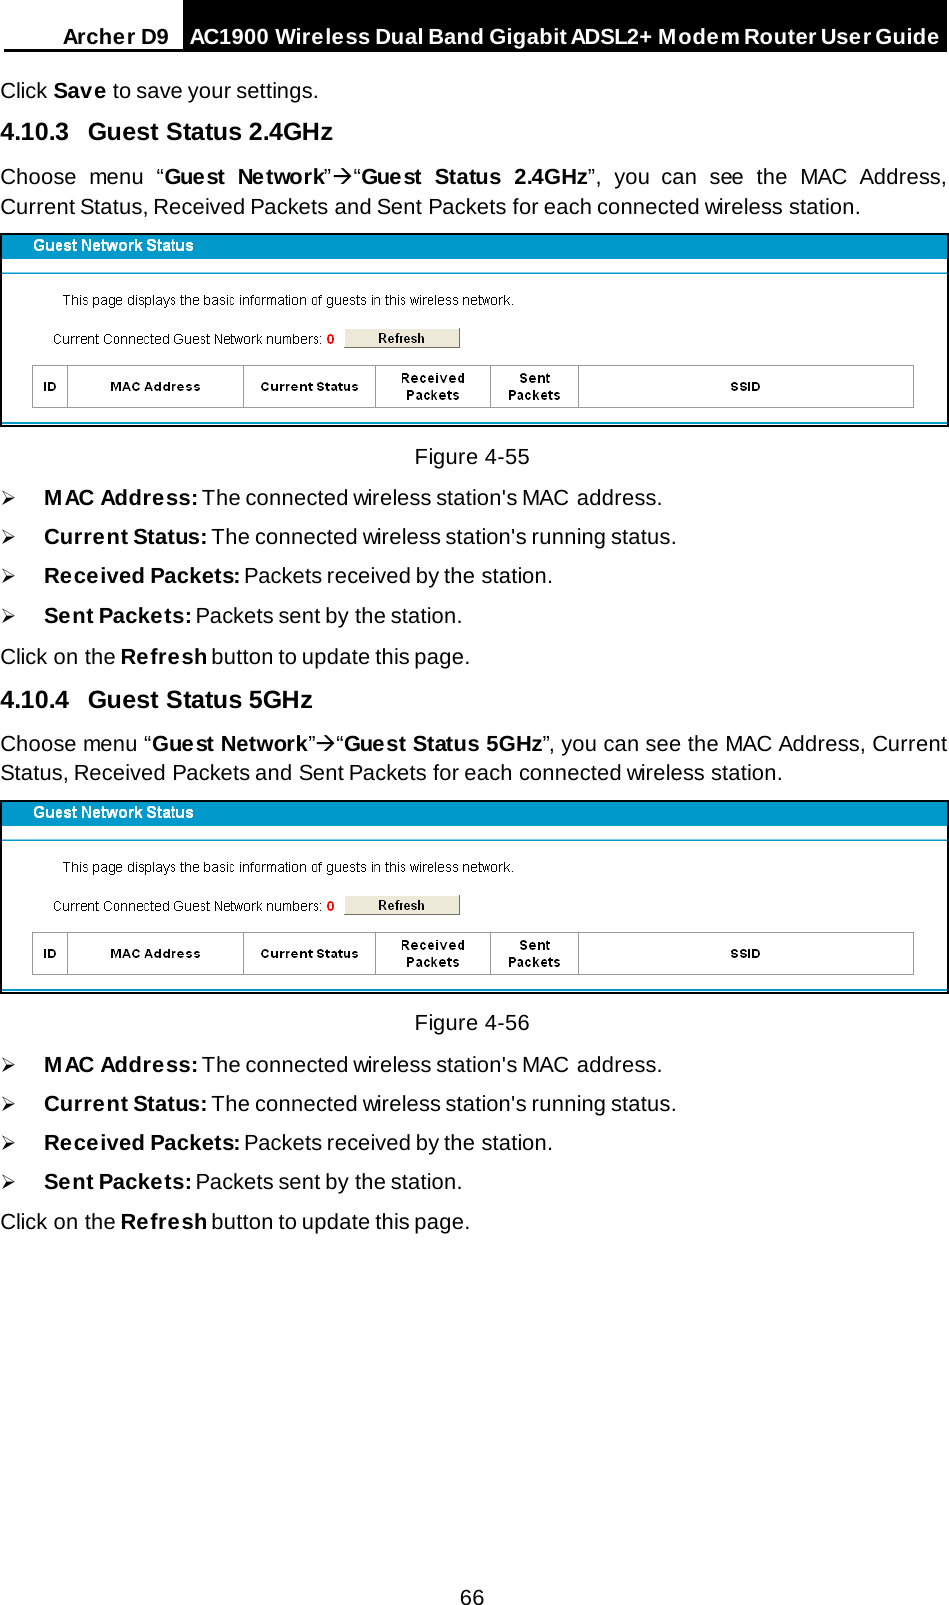 Arche r D9 AC1900 Wireless Dual Band Gigabit ADSL2+ Modem Router User Guide  Click Save to save your settings. 4.10.3 Guest Status 2.4GHz Choose menu “Guest Network”“Guest  Status  2.4GHz”, you can see the MAC Address, Current Status, Received Packets and Sent Packets for each connected wireless station.  Figure 4-55  M AC Addre ss: The connected wireless station&apos;s MAC address.  Current Status: The connected wireless station&apos;s running status.  Received Packets: Packets received by the station.  Sent Packets: Packets sent by the station. Click on the Refresh button to update this page. 4.10.4 Guest Status 5GHz Choose menu “Guest Network”“Guest Status 5GHz”, you can see the MAC Address, Current Status, Received Packets and Sent Packets for each connected wireless station.  Figure 4-56  M AC Addre ss: The connected wireless station&apos;s MAC address.  Current Status: The connected wireless station&apos;s running status.  Received Packets: Packets received by the station.  Sent Packets: Packets sent by the station. Click on the Refresh button to update this page. 66 